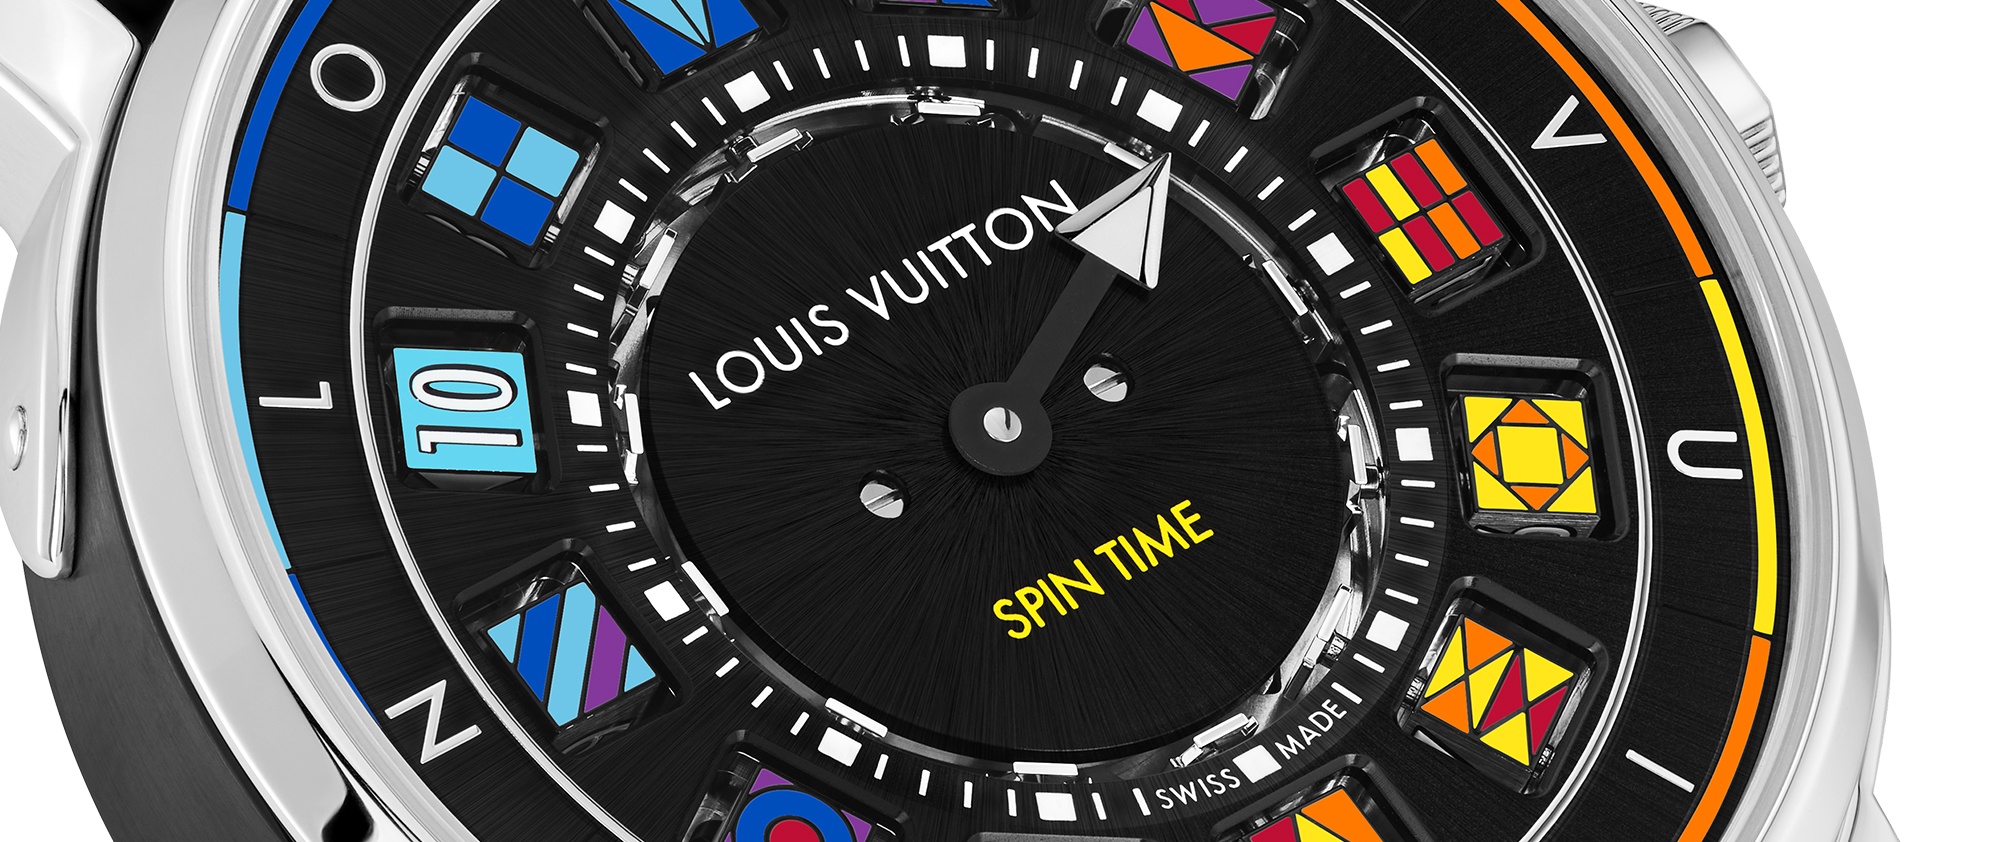 Louis Vuitton updates its iconic timepieces with rainbow colours